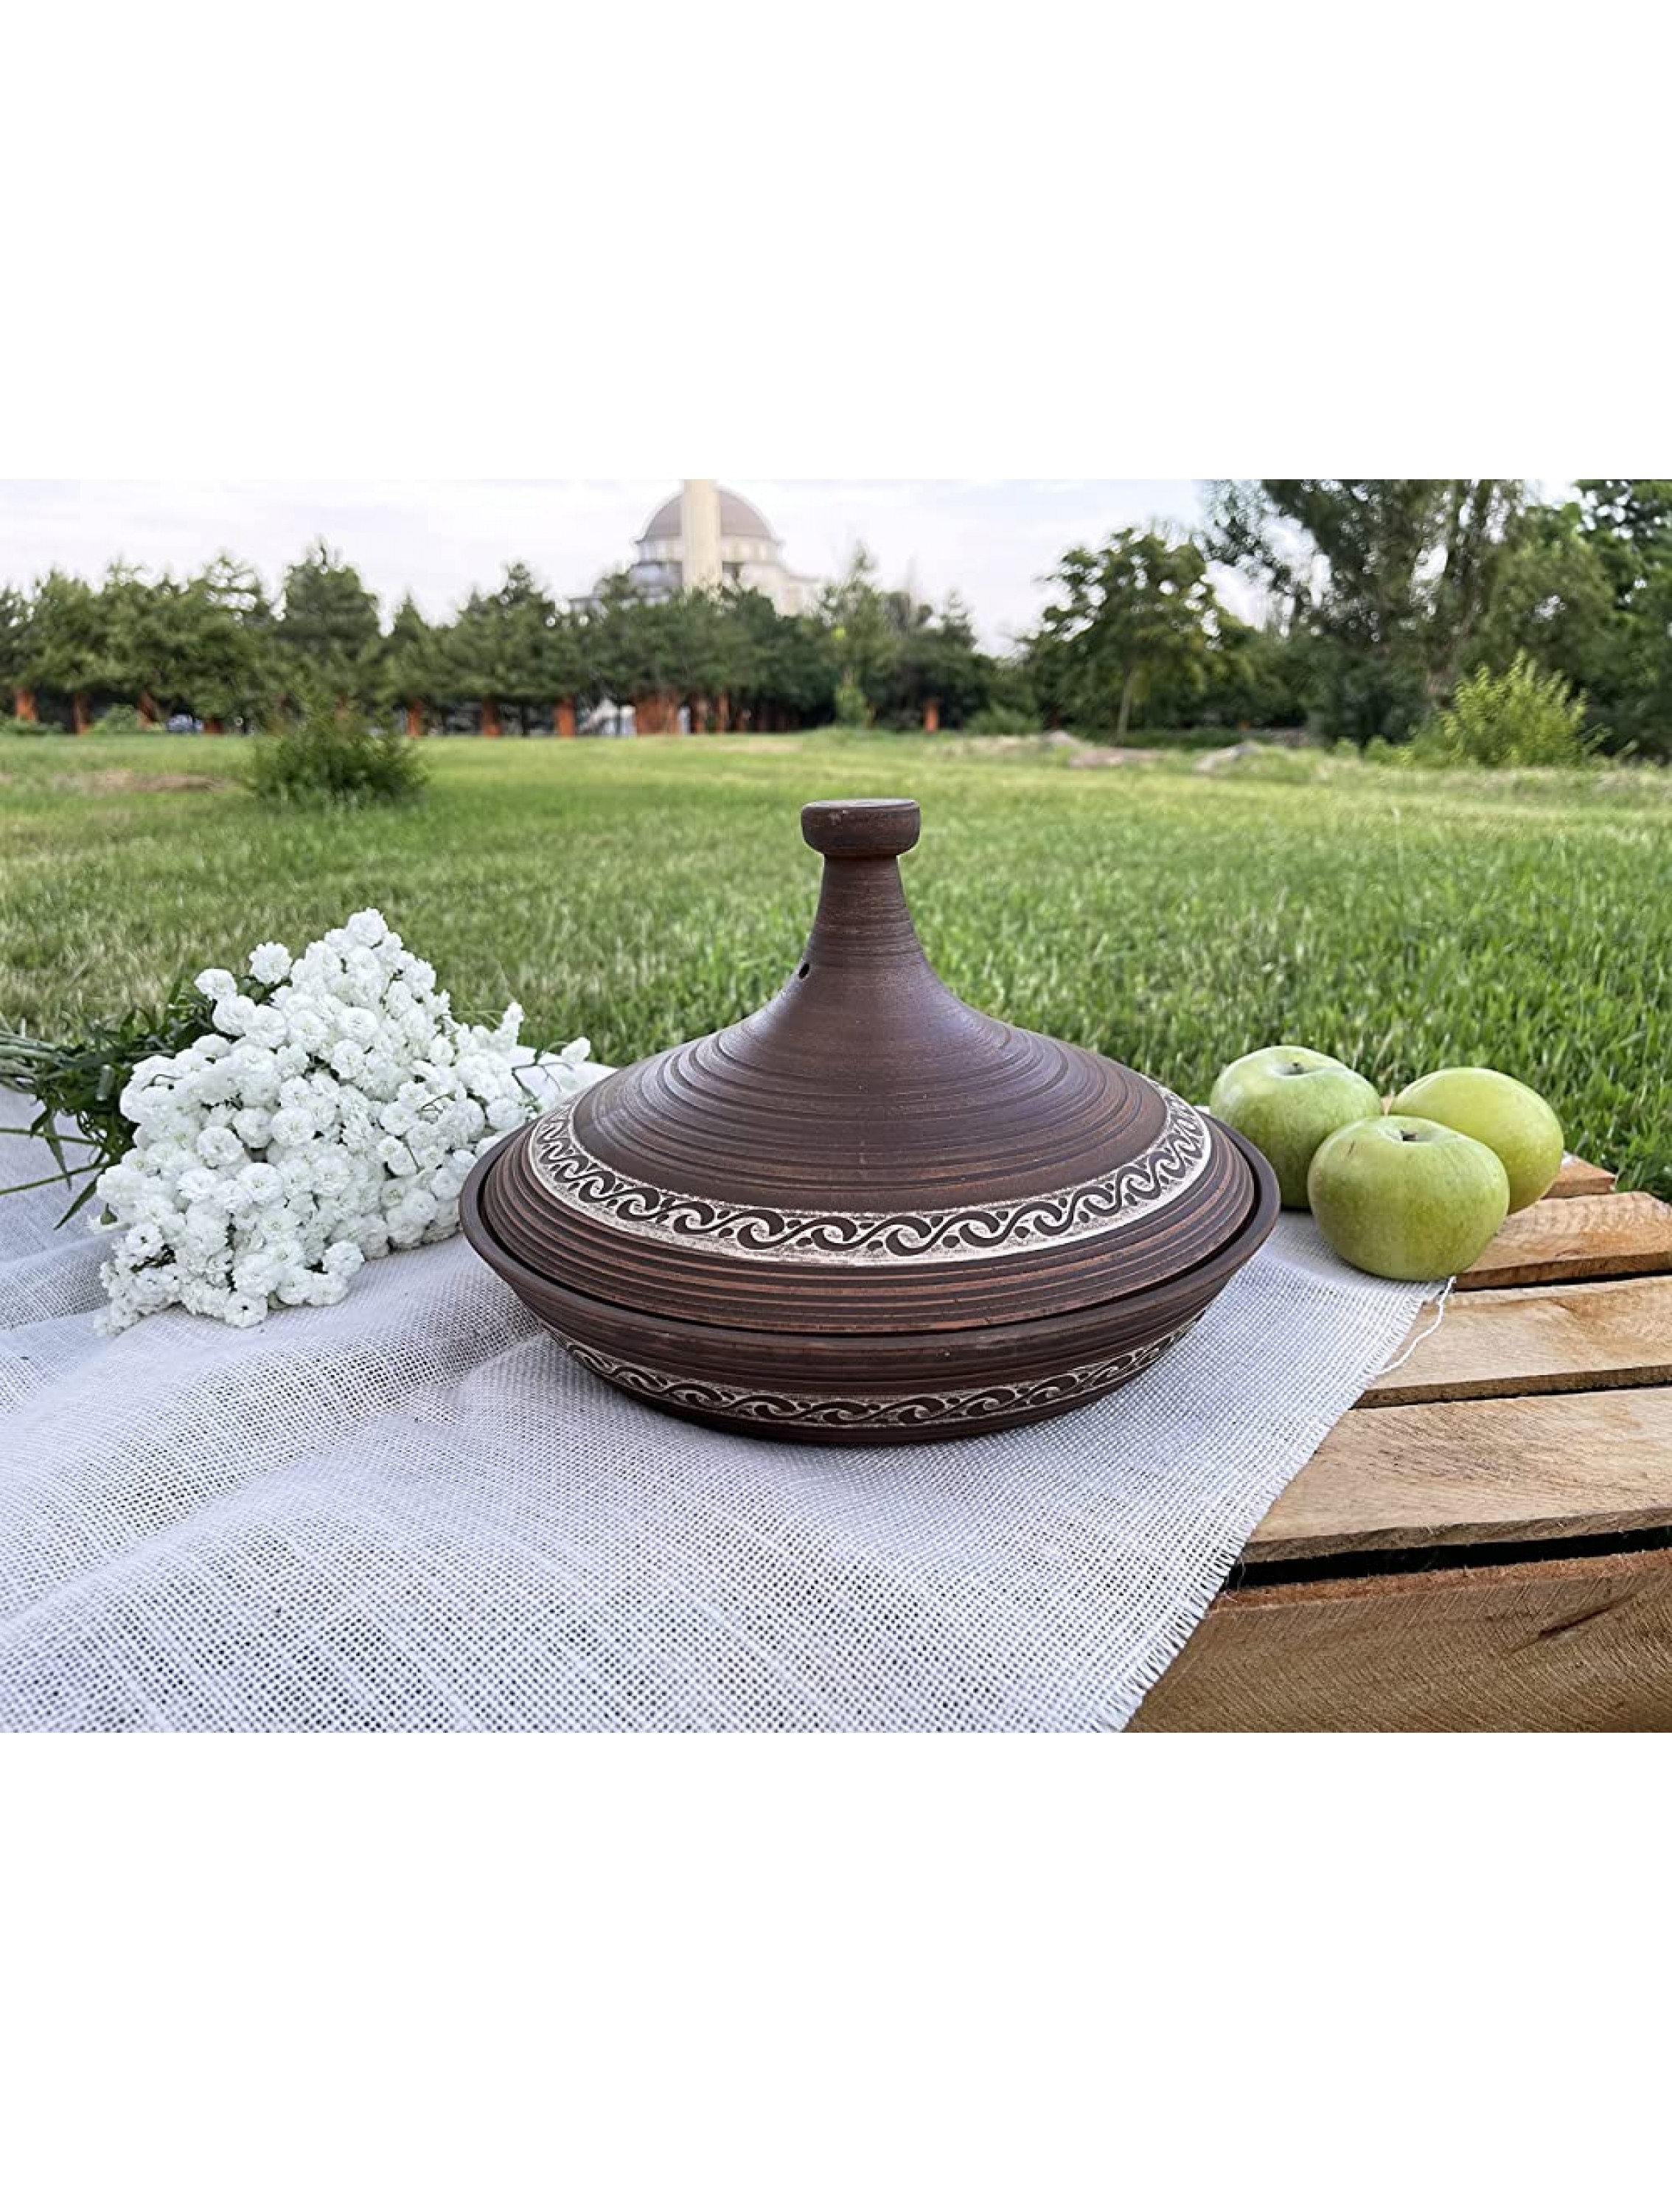 Tagine 100% handmade Red Clay Pottery Ceramics ECO product Decor Clay Cookware Made in Ukraine. - B1S3L9I8Z